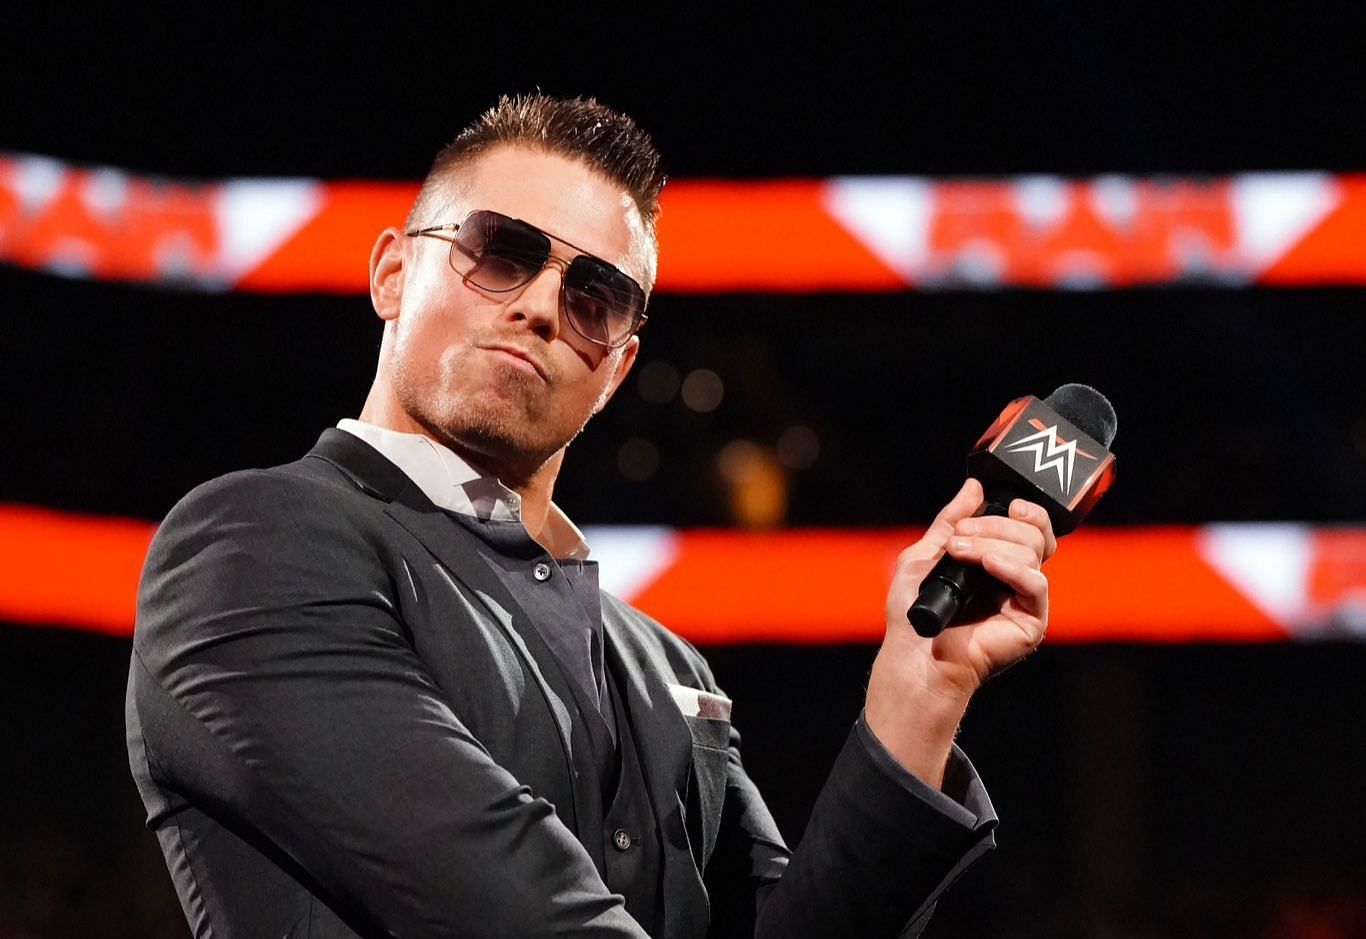 The Miz is 2-time GrandSlam champion in WWE History